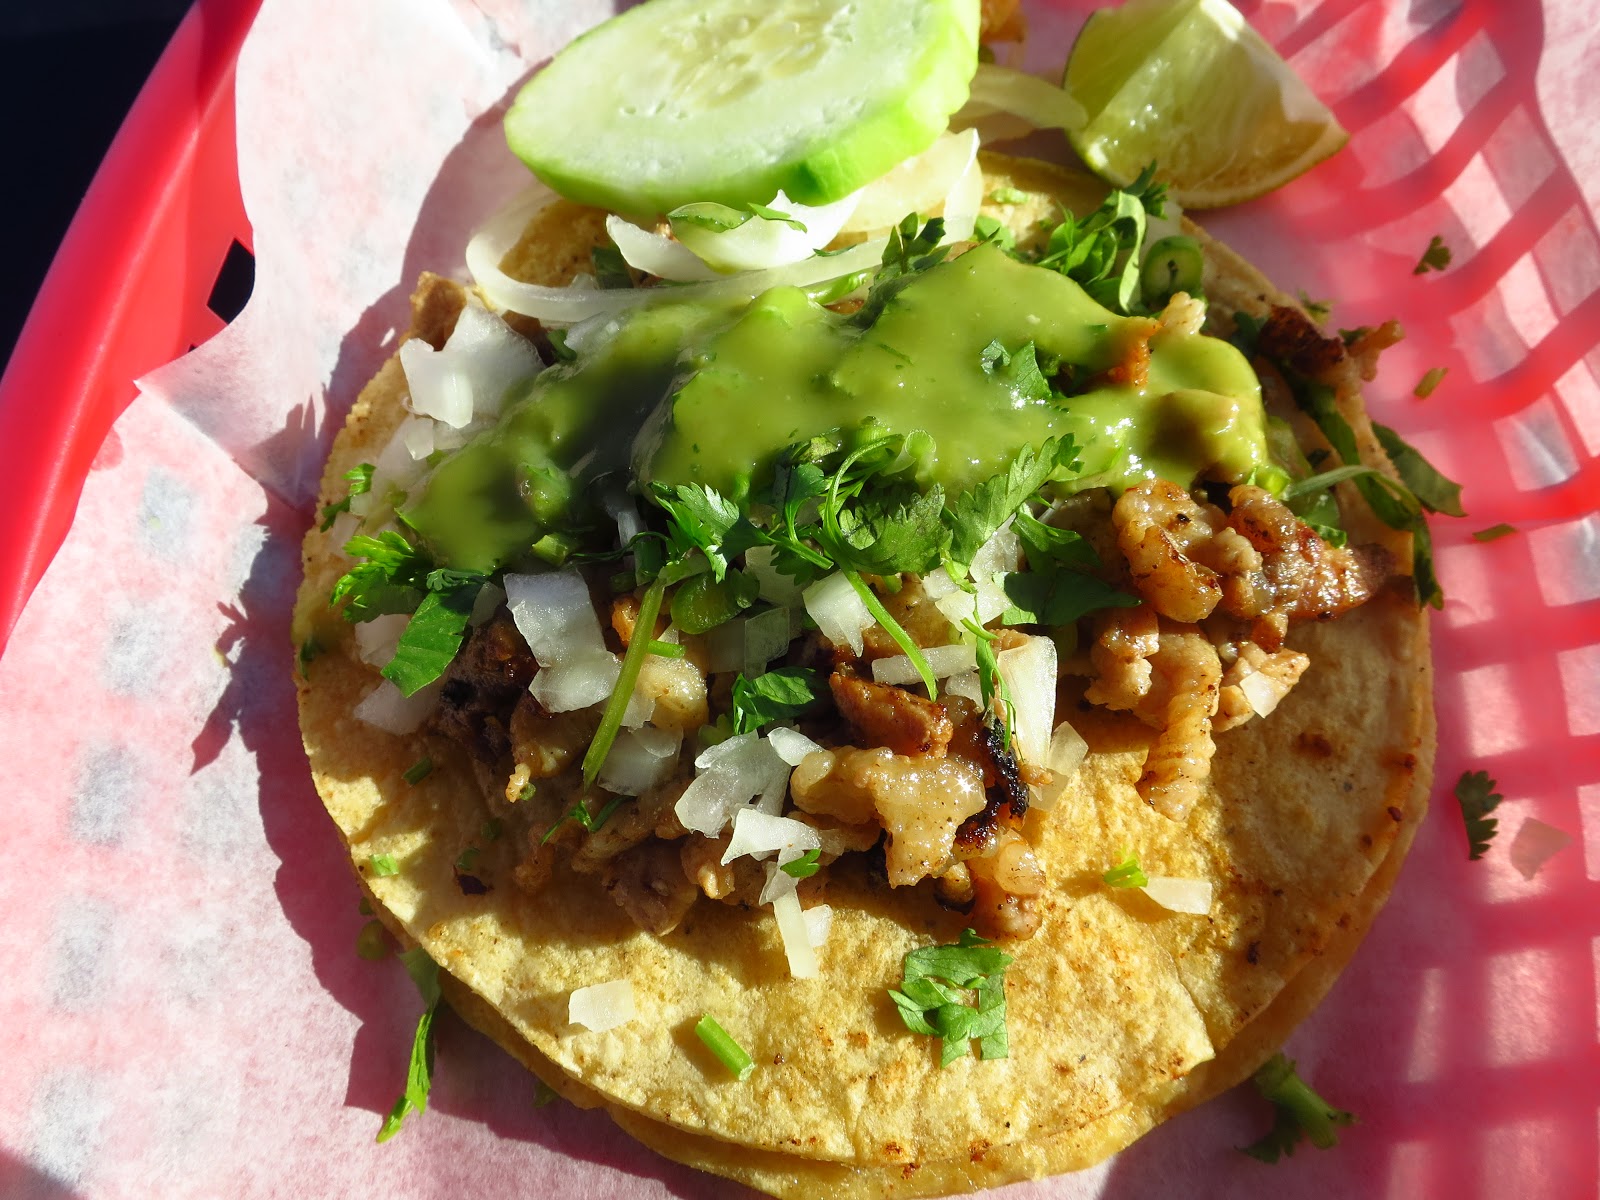 Smokin' Chokin' and Chowing with the King: Chicago's Street Taco Scene